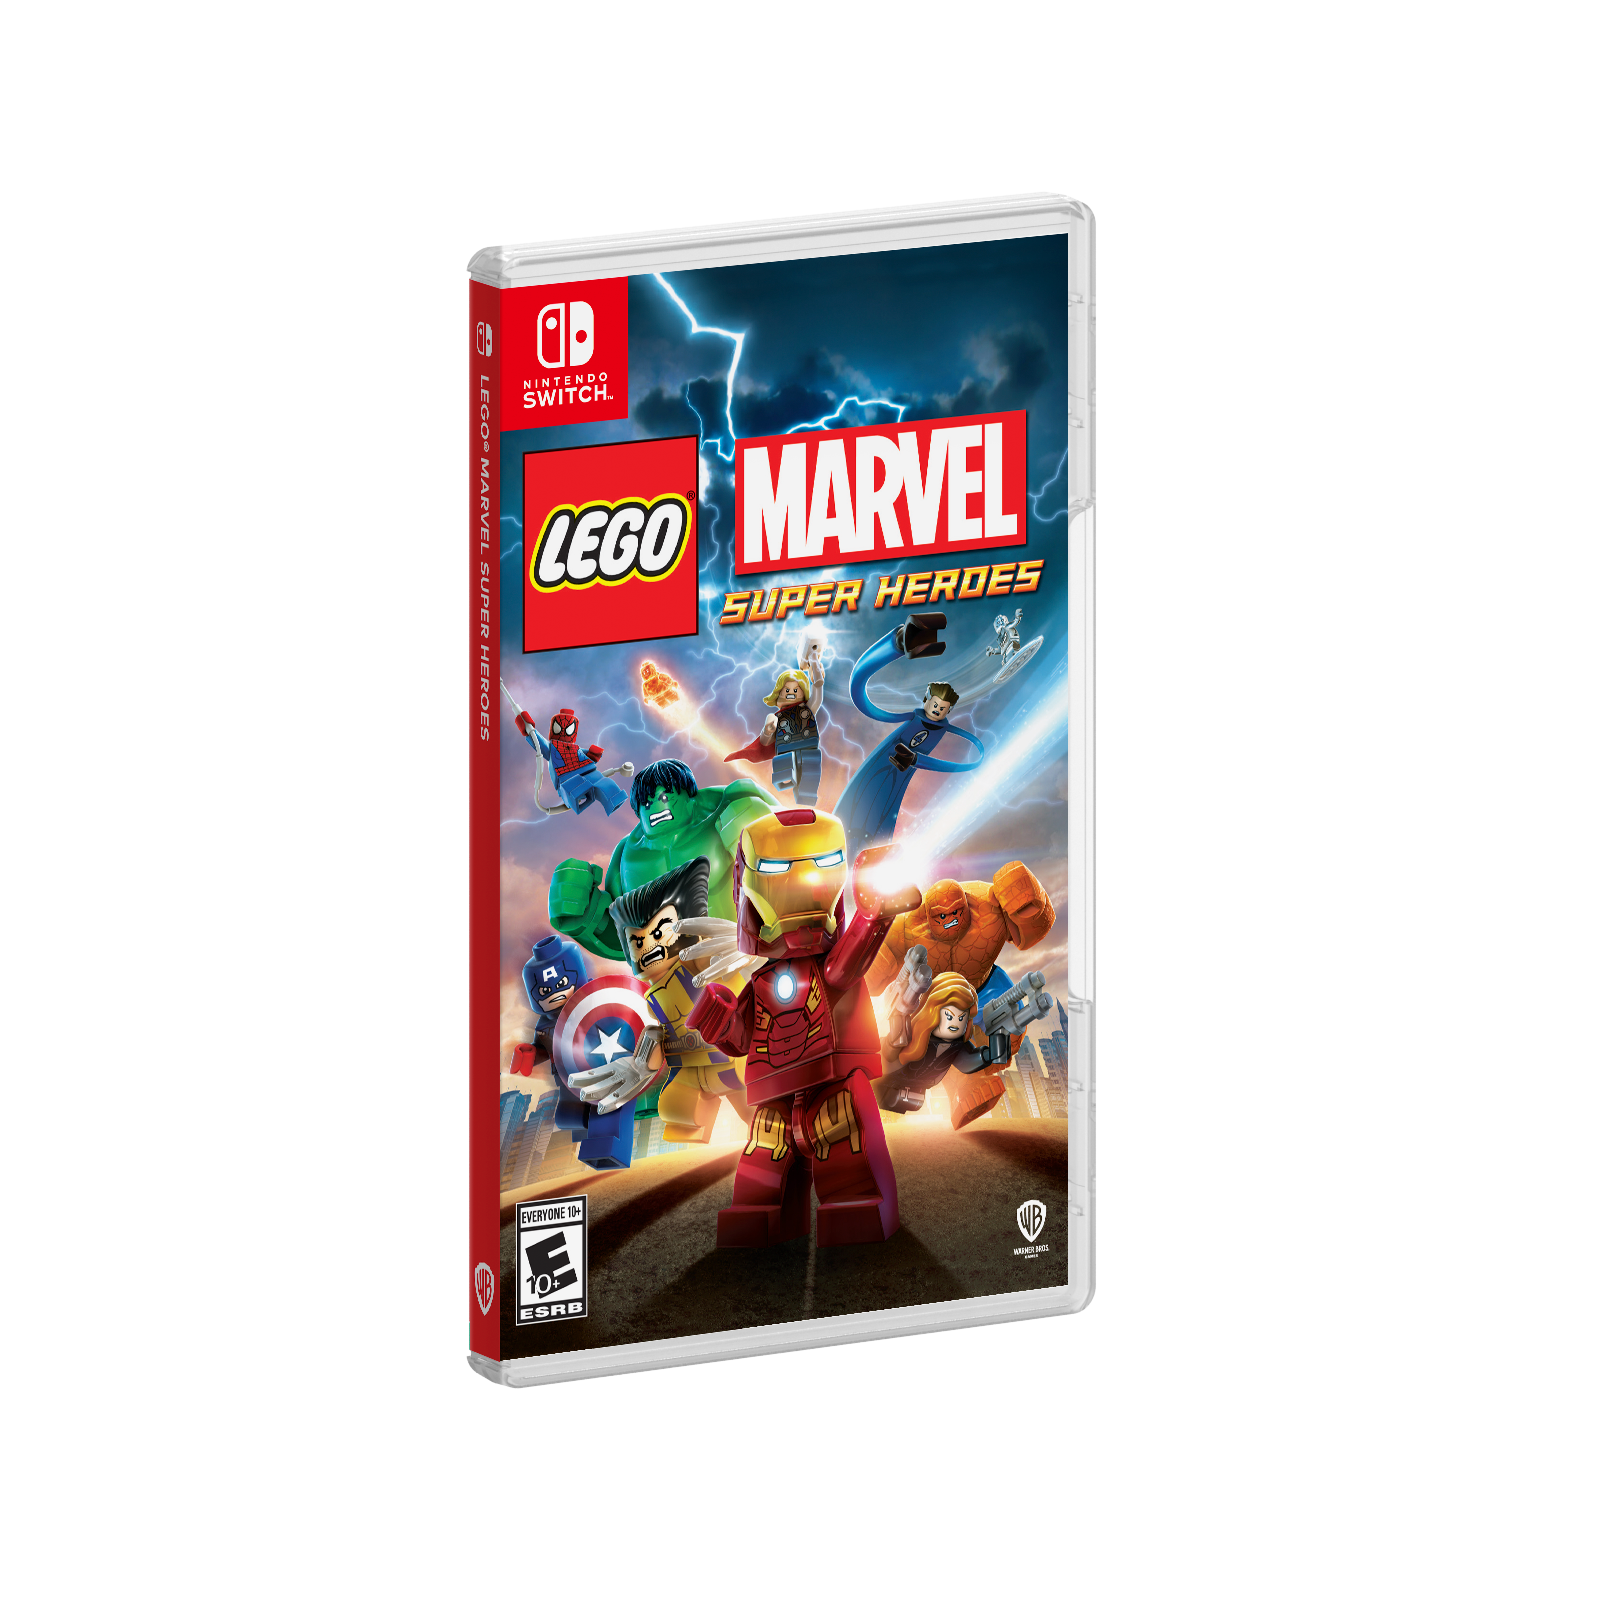 farvestof mor Frank Worthley LEGO Marvel Super Heroes Now Available on Nintendo Switch - The Brick Fan